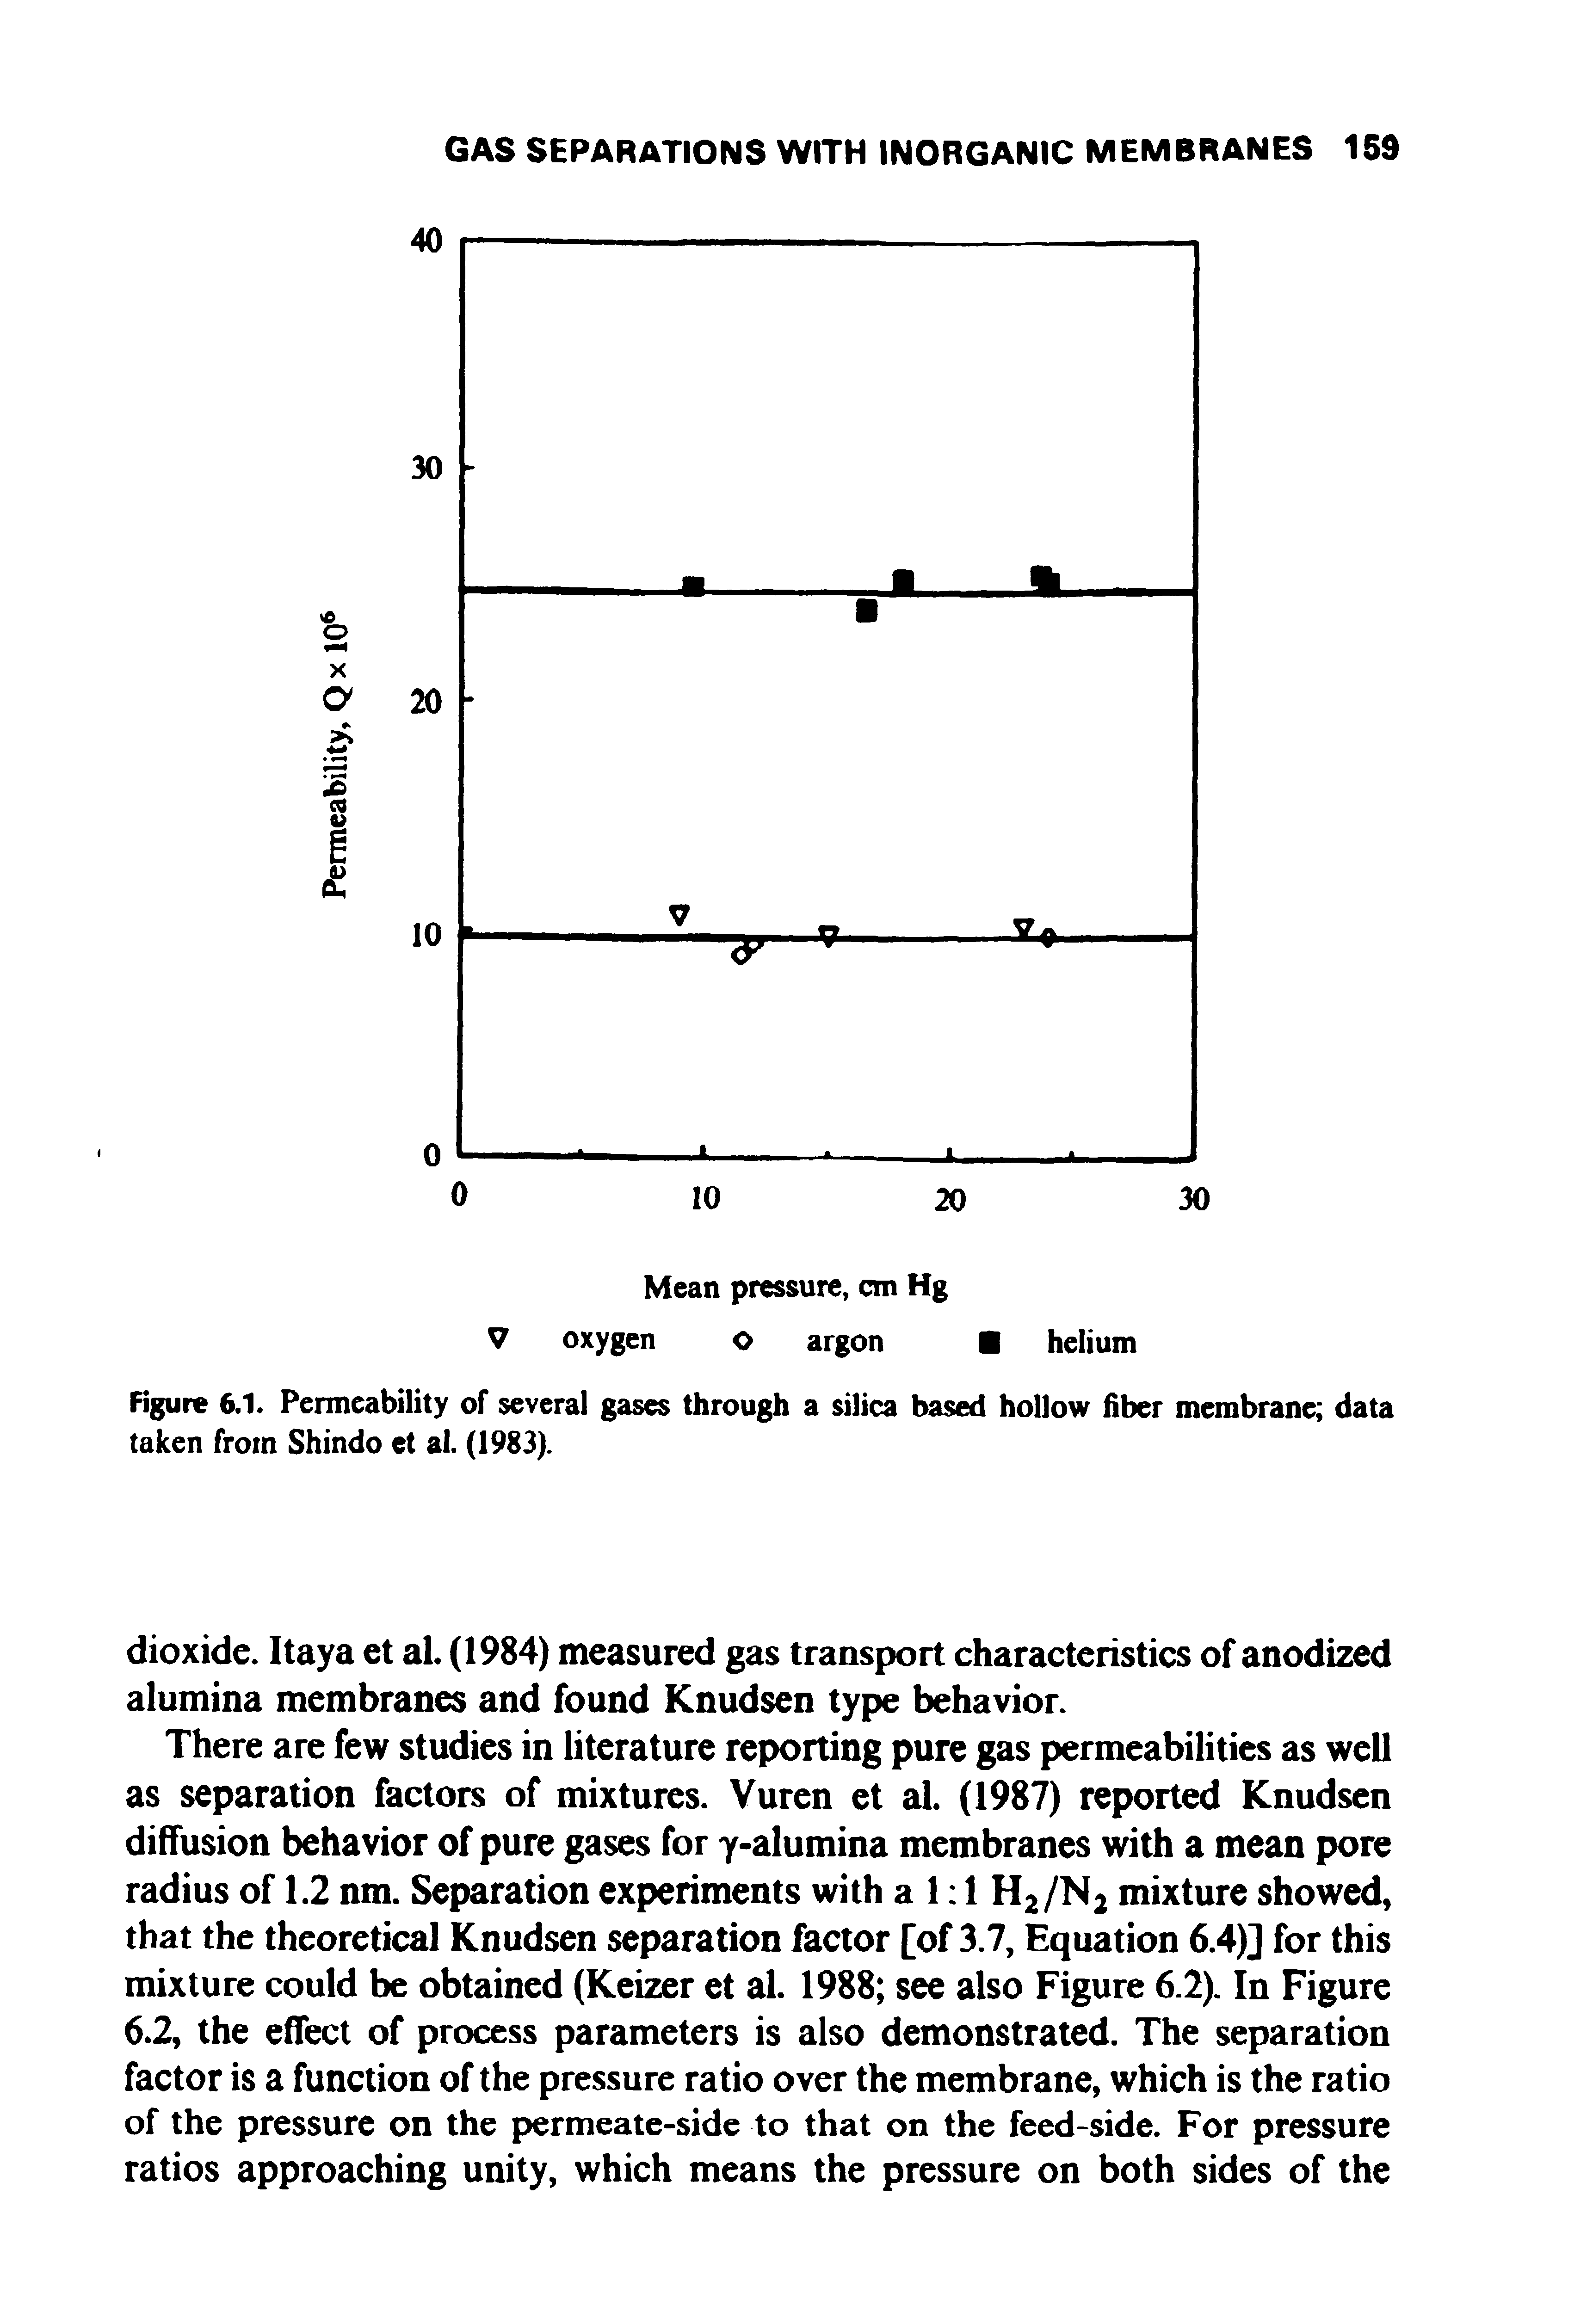 Figure 6.1. Permeability of several gases through a silica based hollow fiber membrane data taken from Shindo et al. (1983).